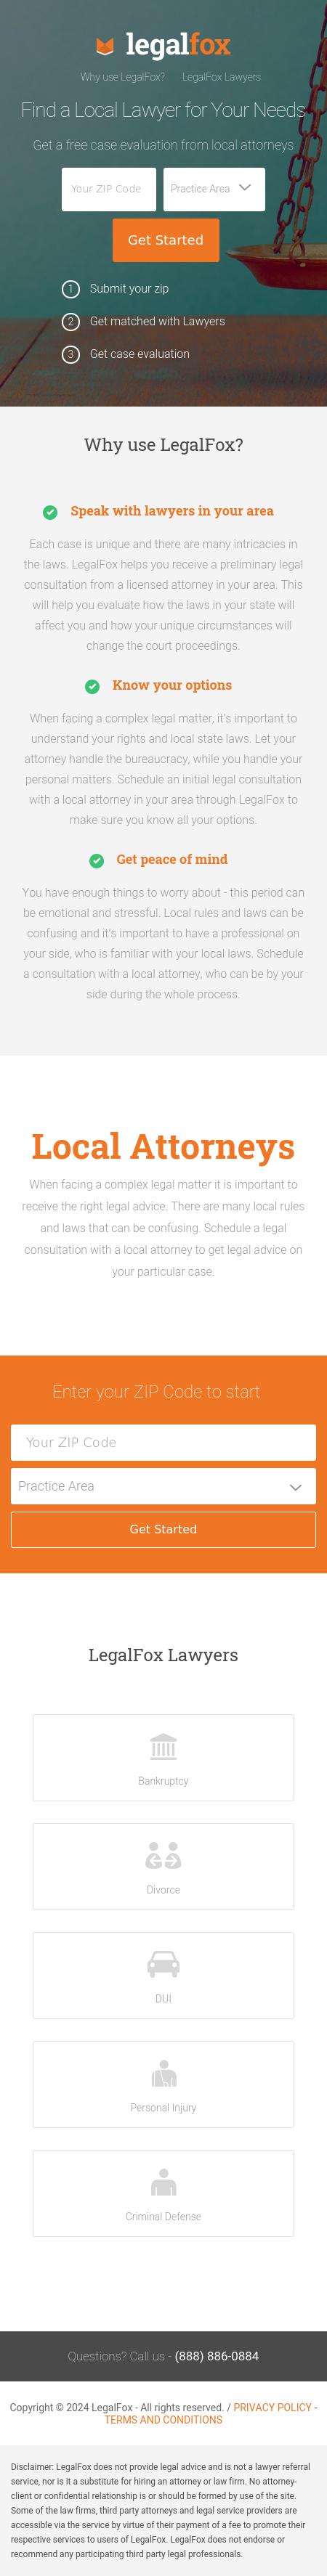 Find a Local Attorney - Lubbock TX Lawyers